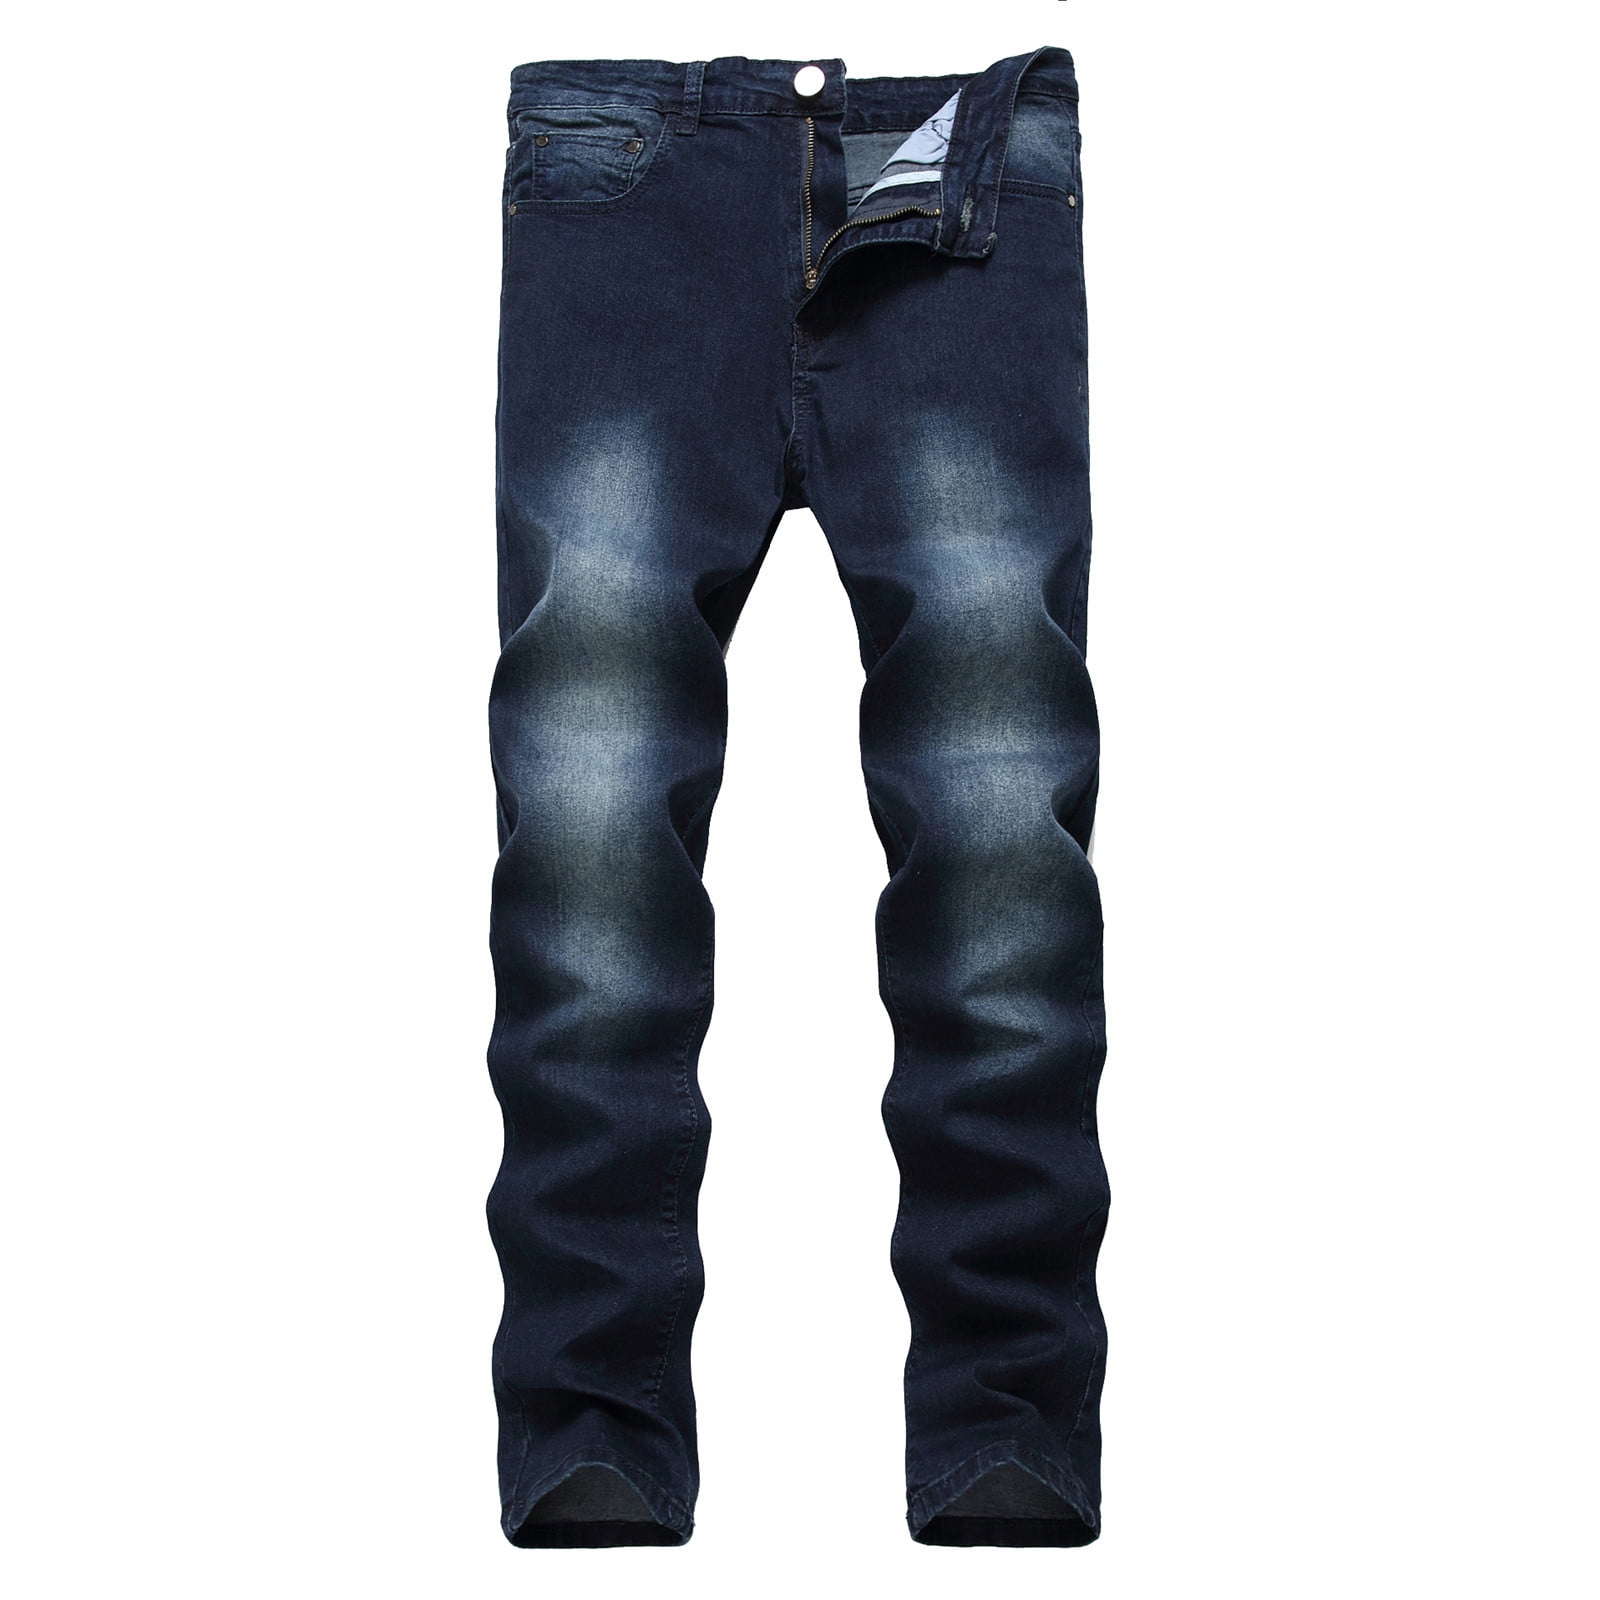 Men'S Jeans Jeans Comfort Stretch Denim Straight Leg Relaxed Fit Jeans ...